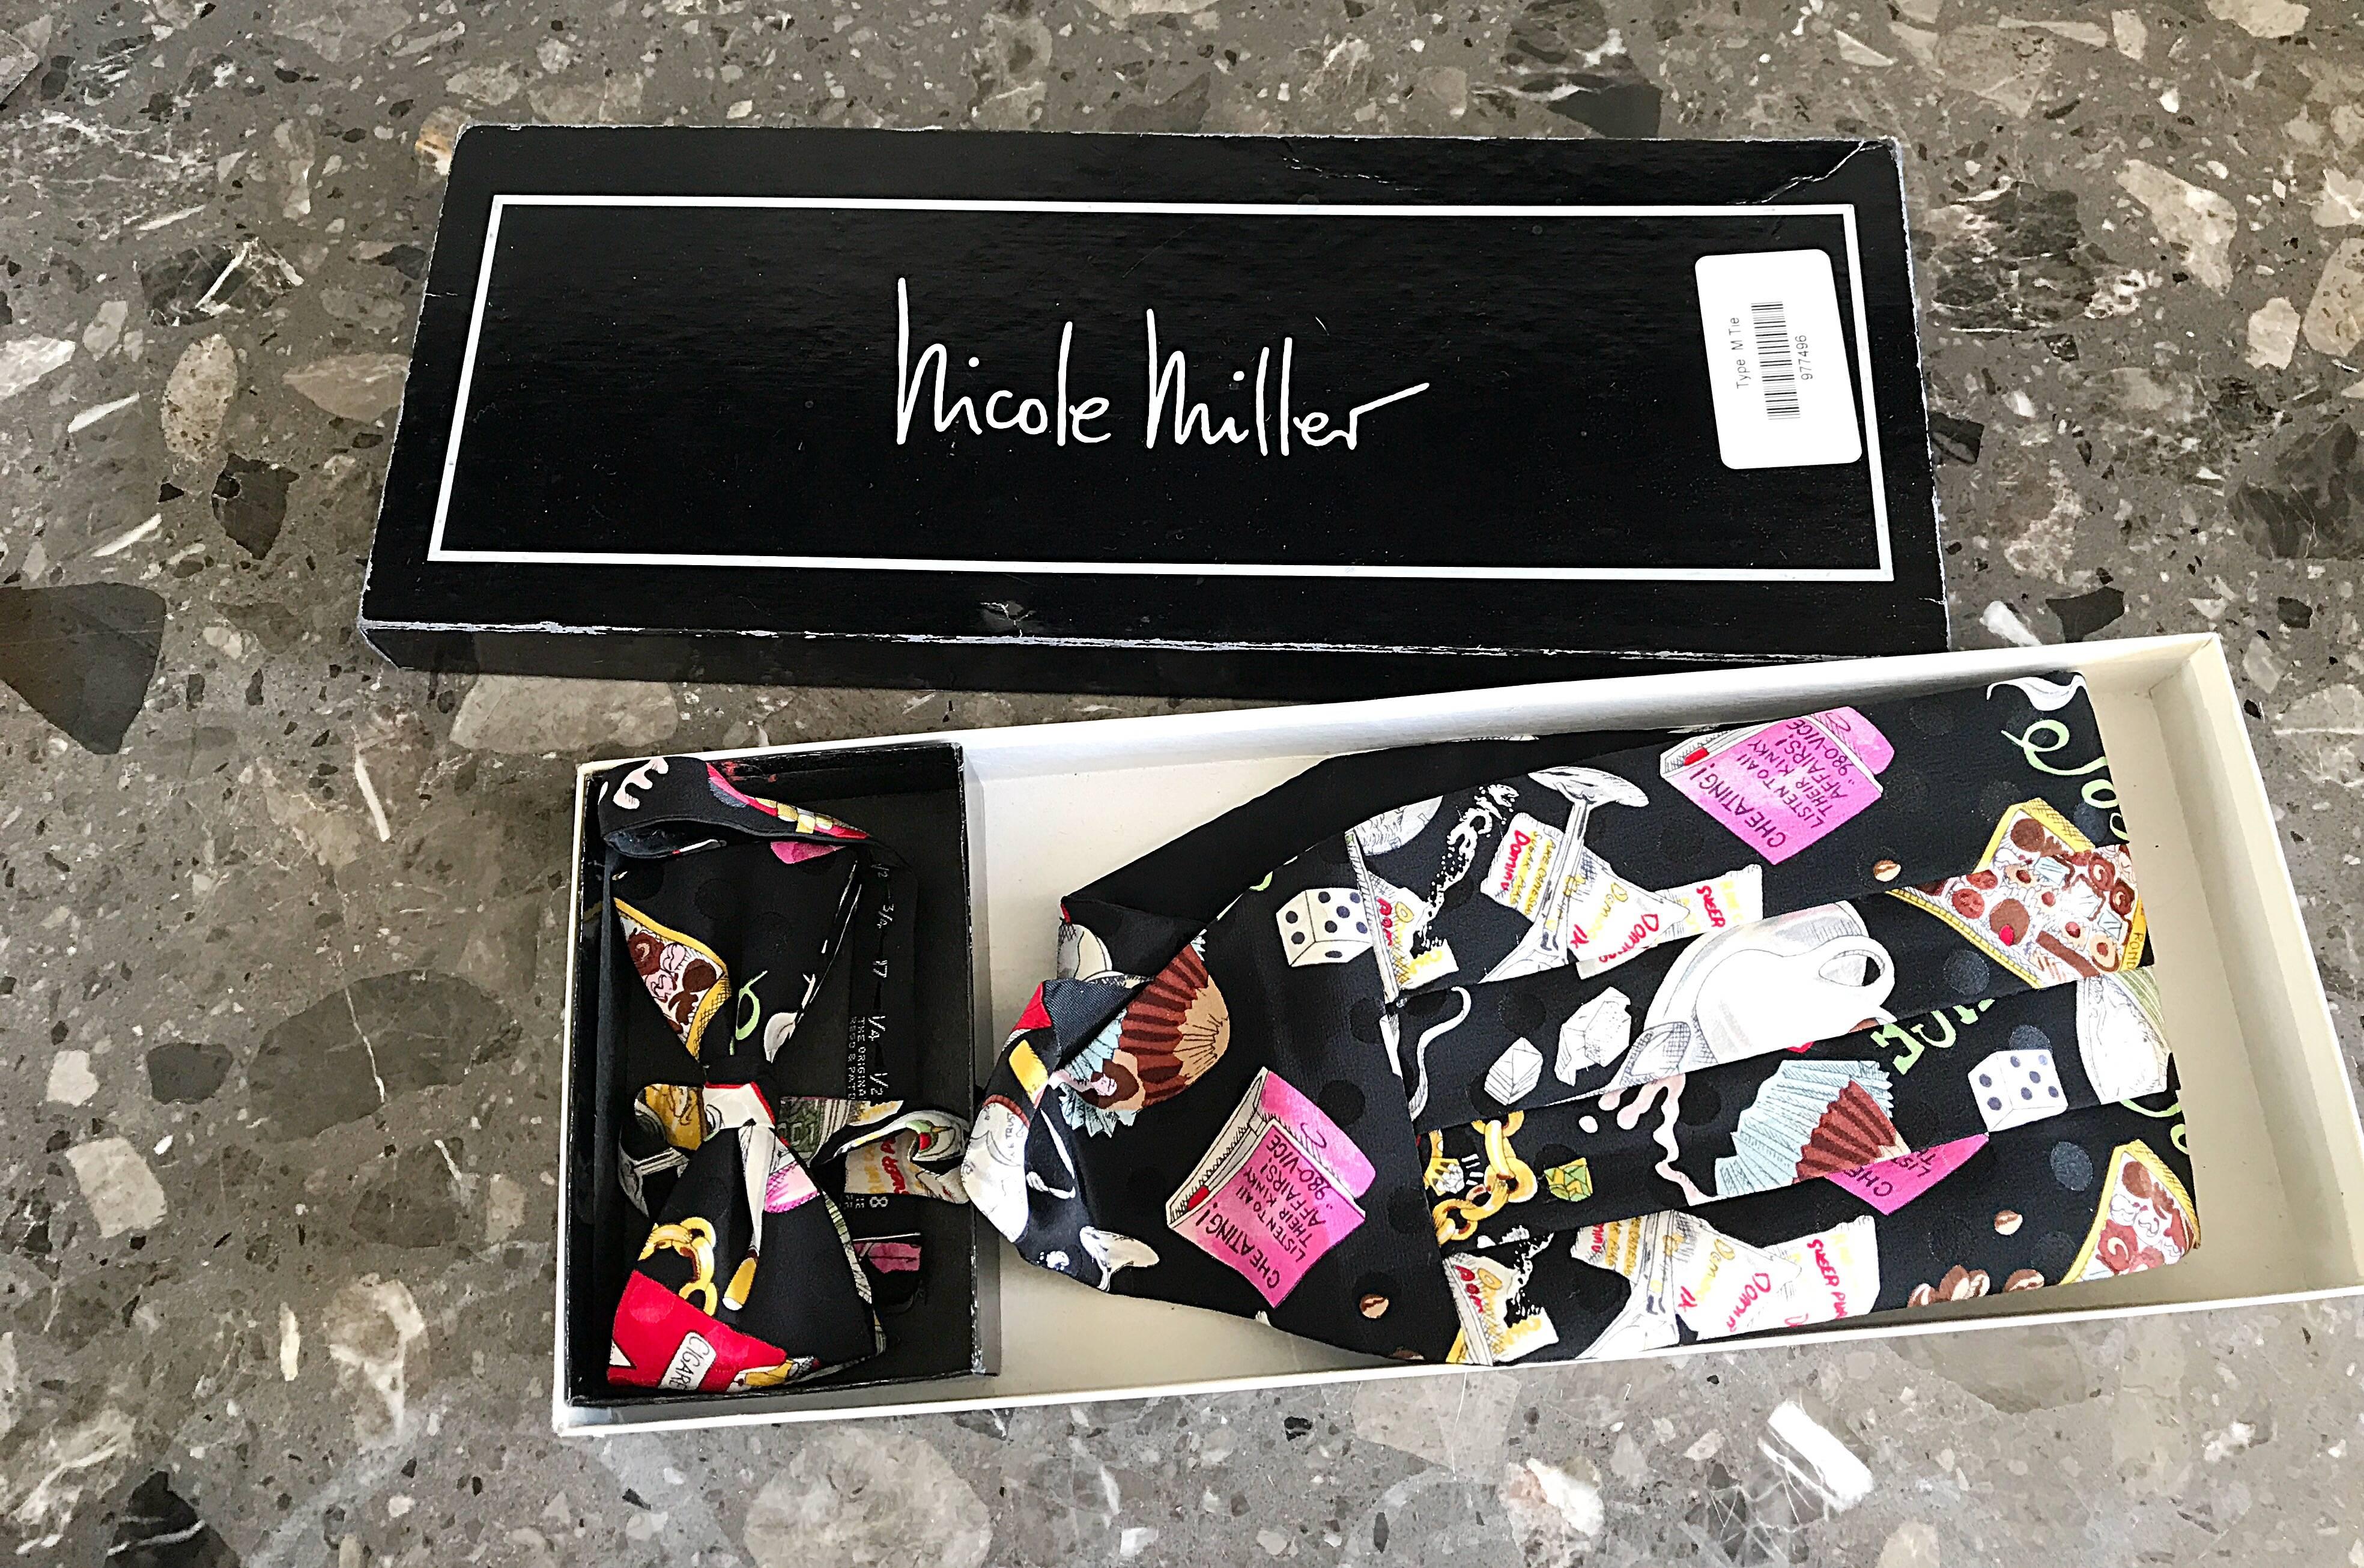 Rare New in Box early 90s NICOLE MILLER men's novelty cummerbund and bow tie set! Awesome print features a book titled, 